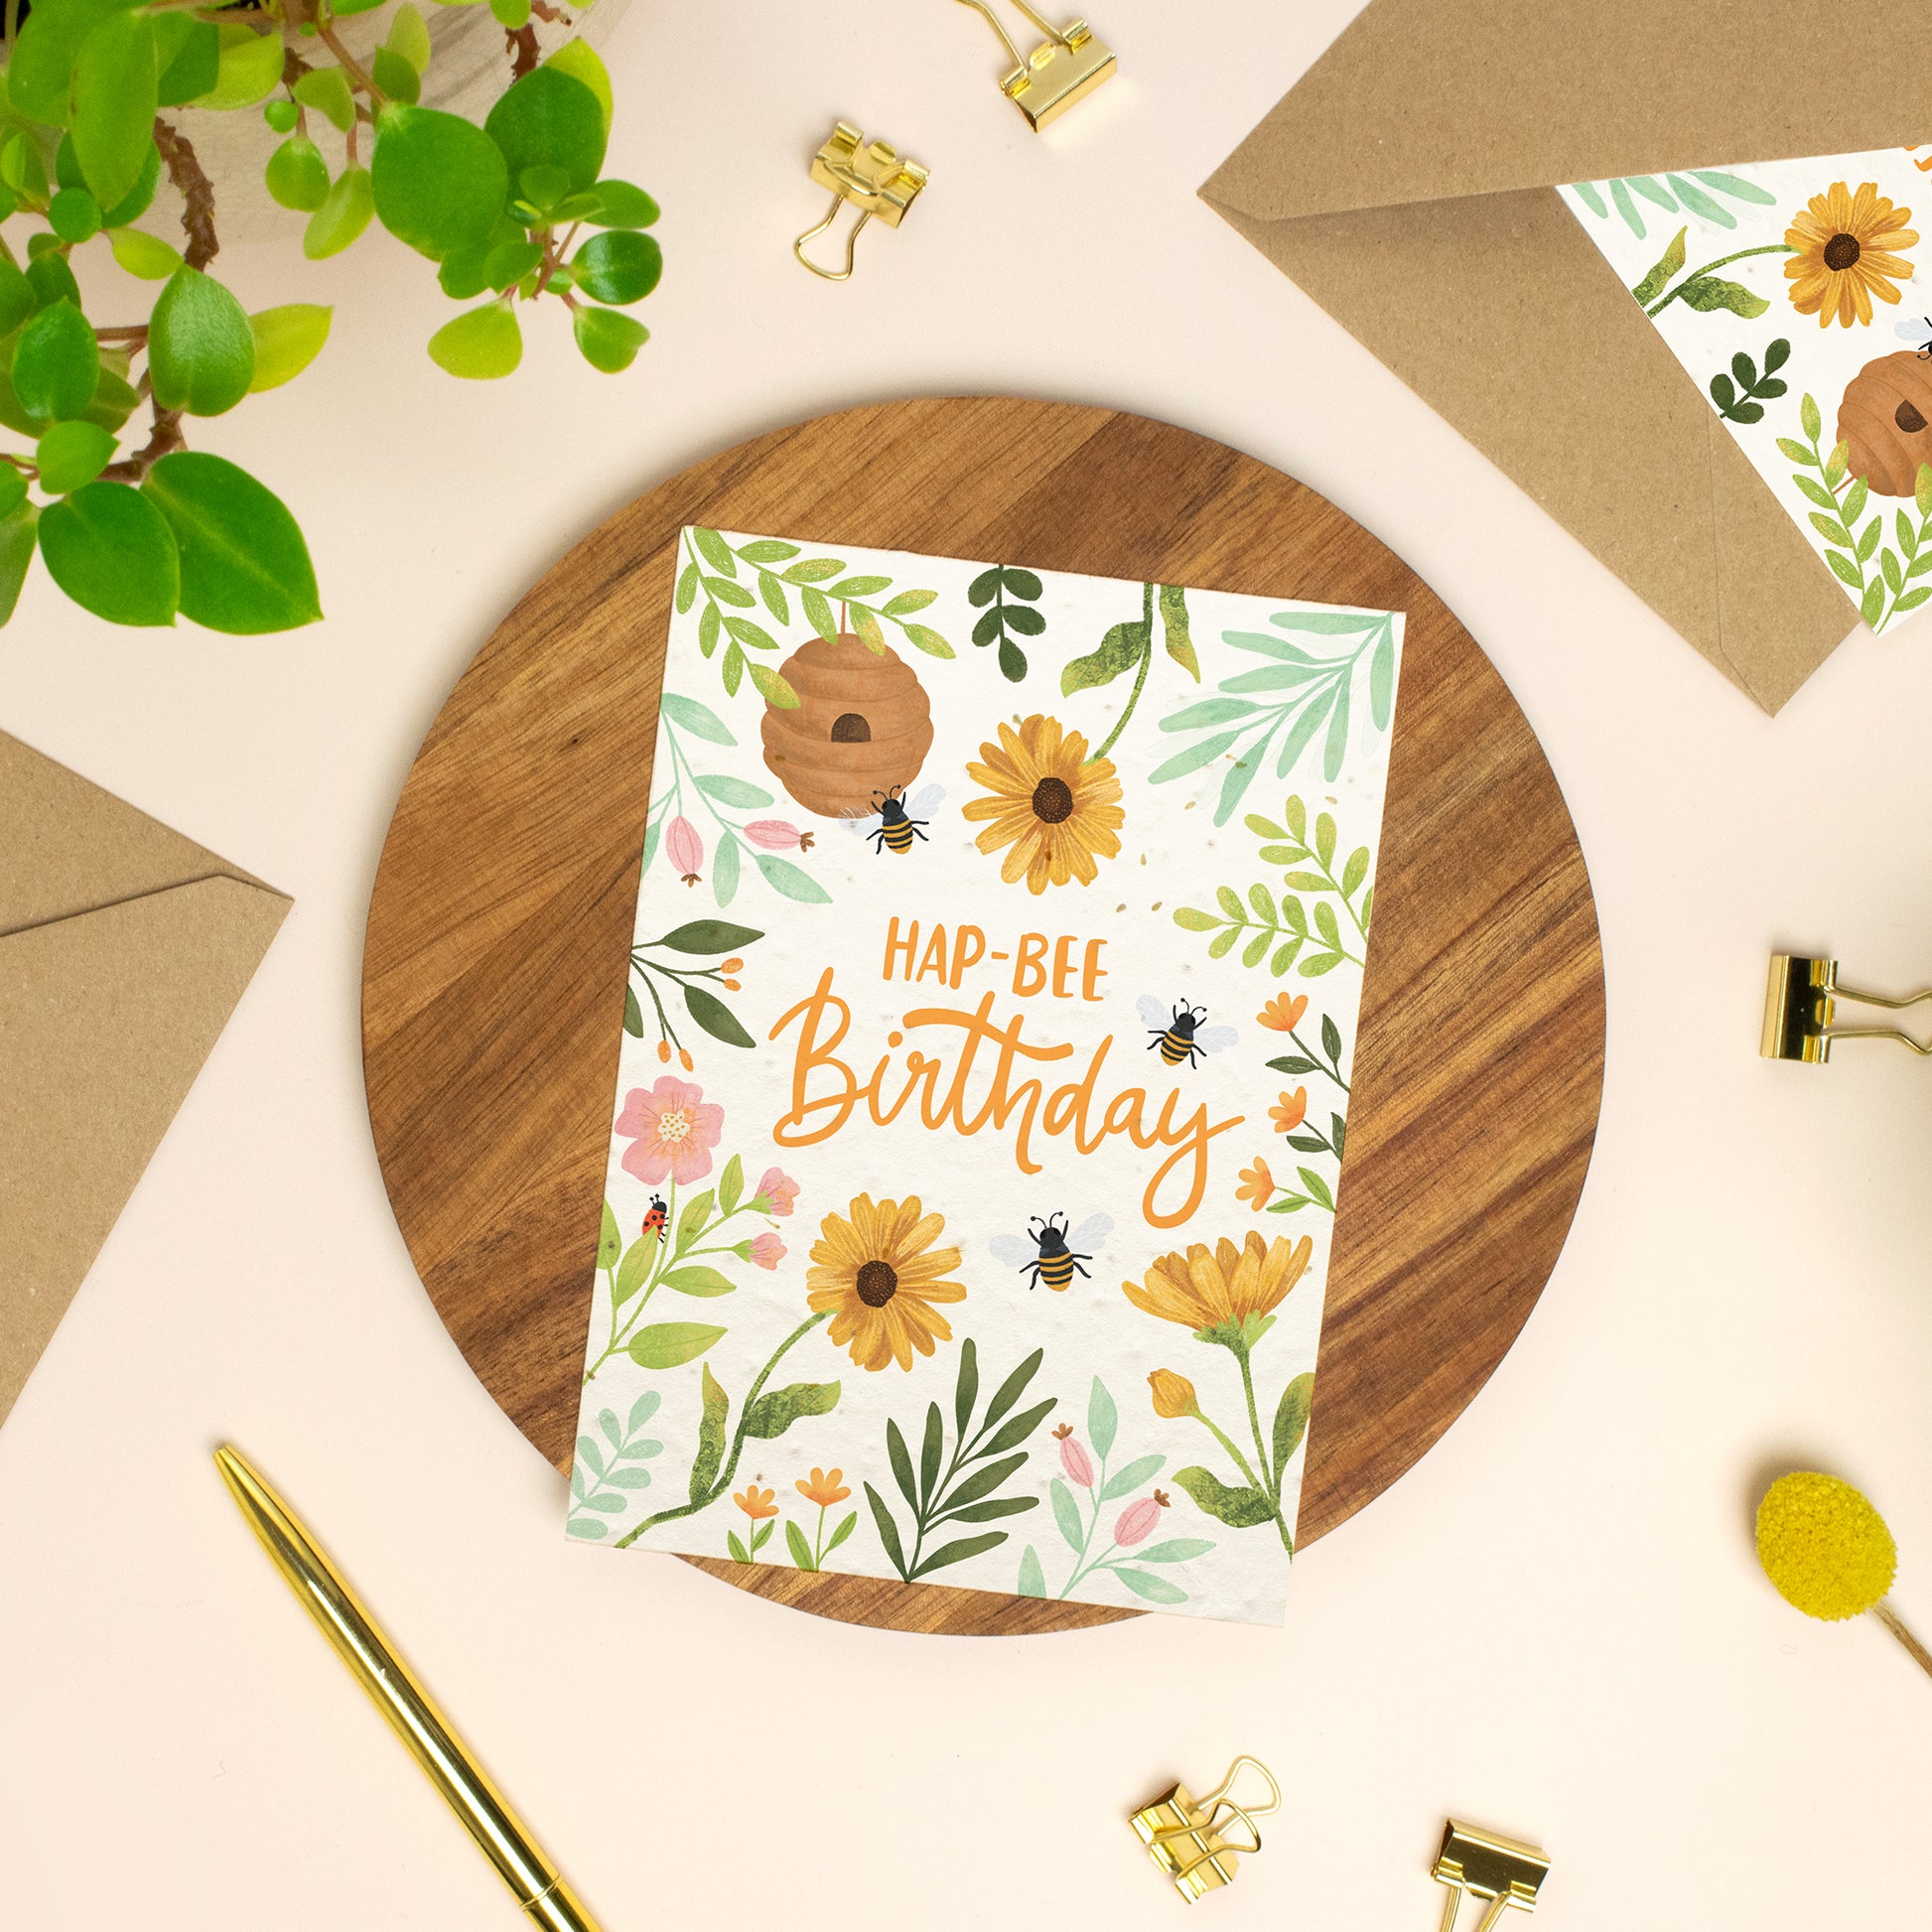 Plantable birthday card with Bees and wildflowers on a wooden board